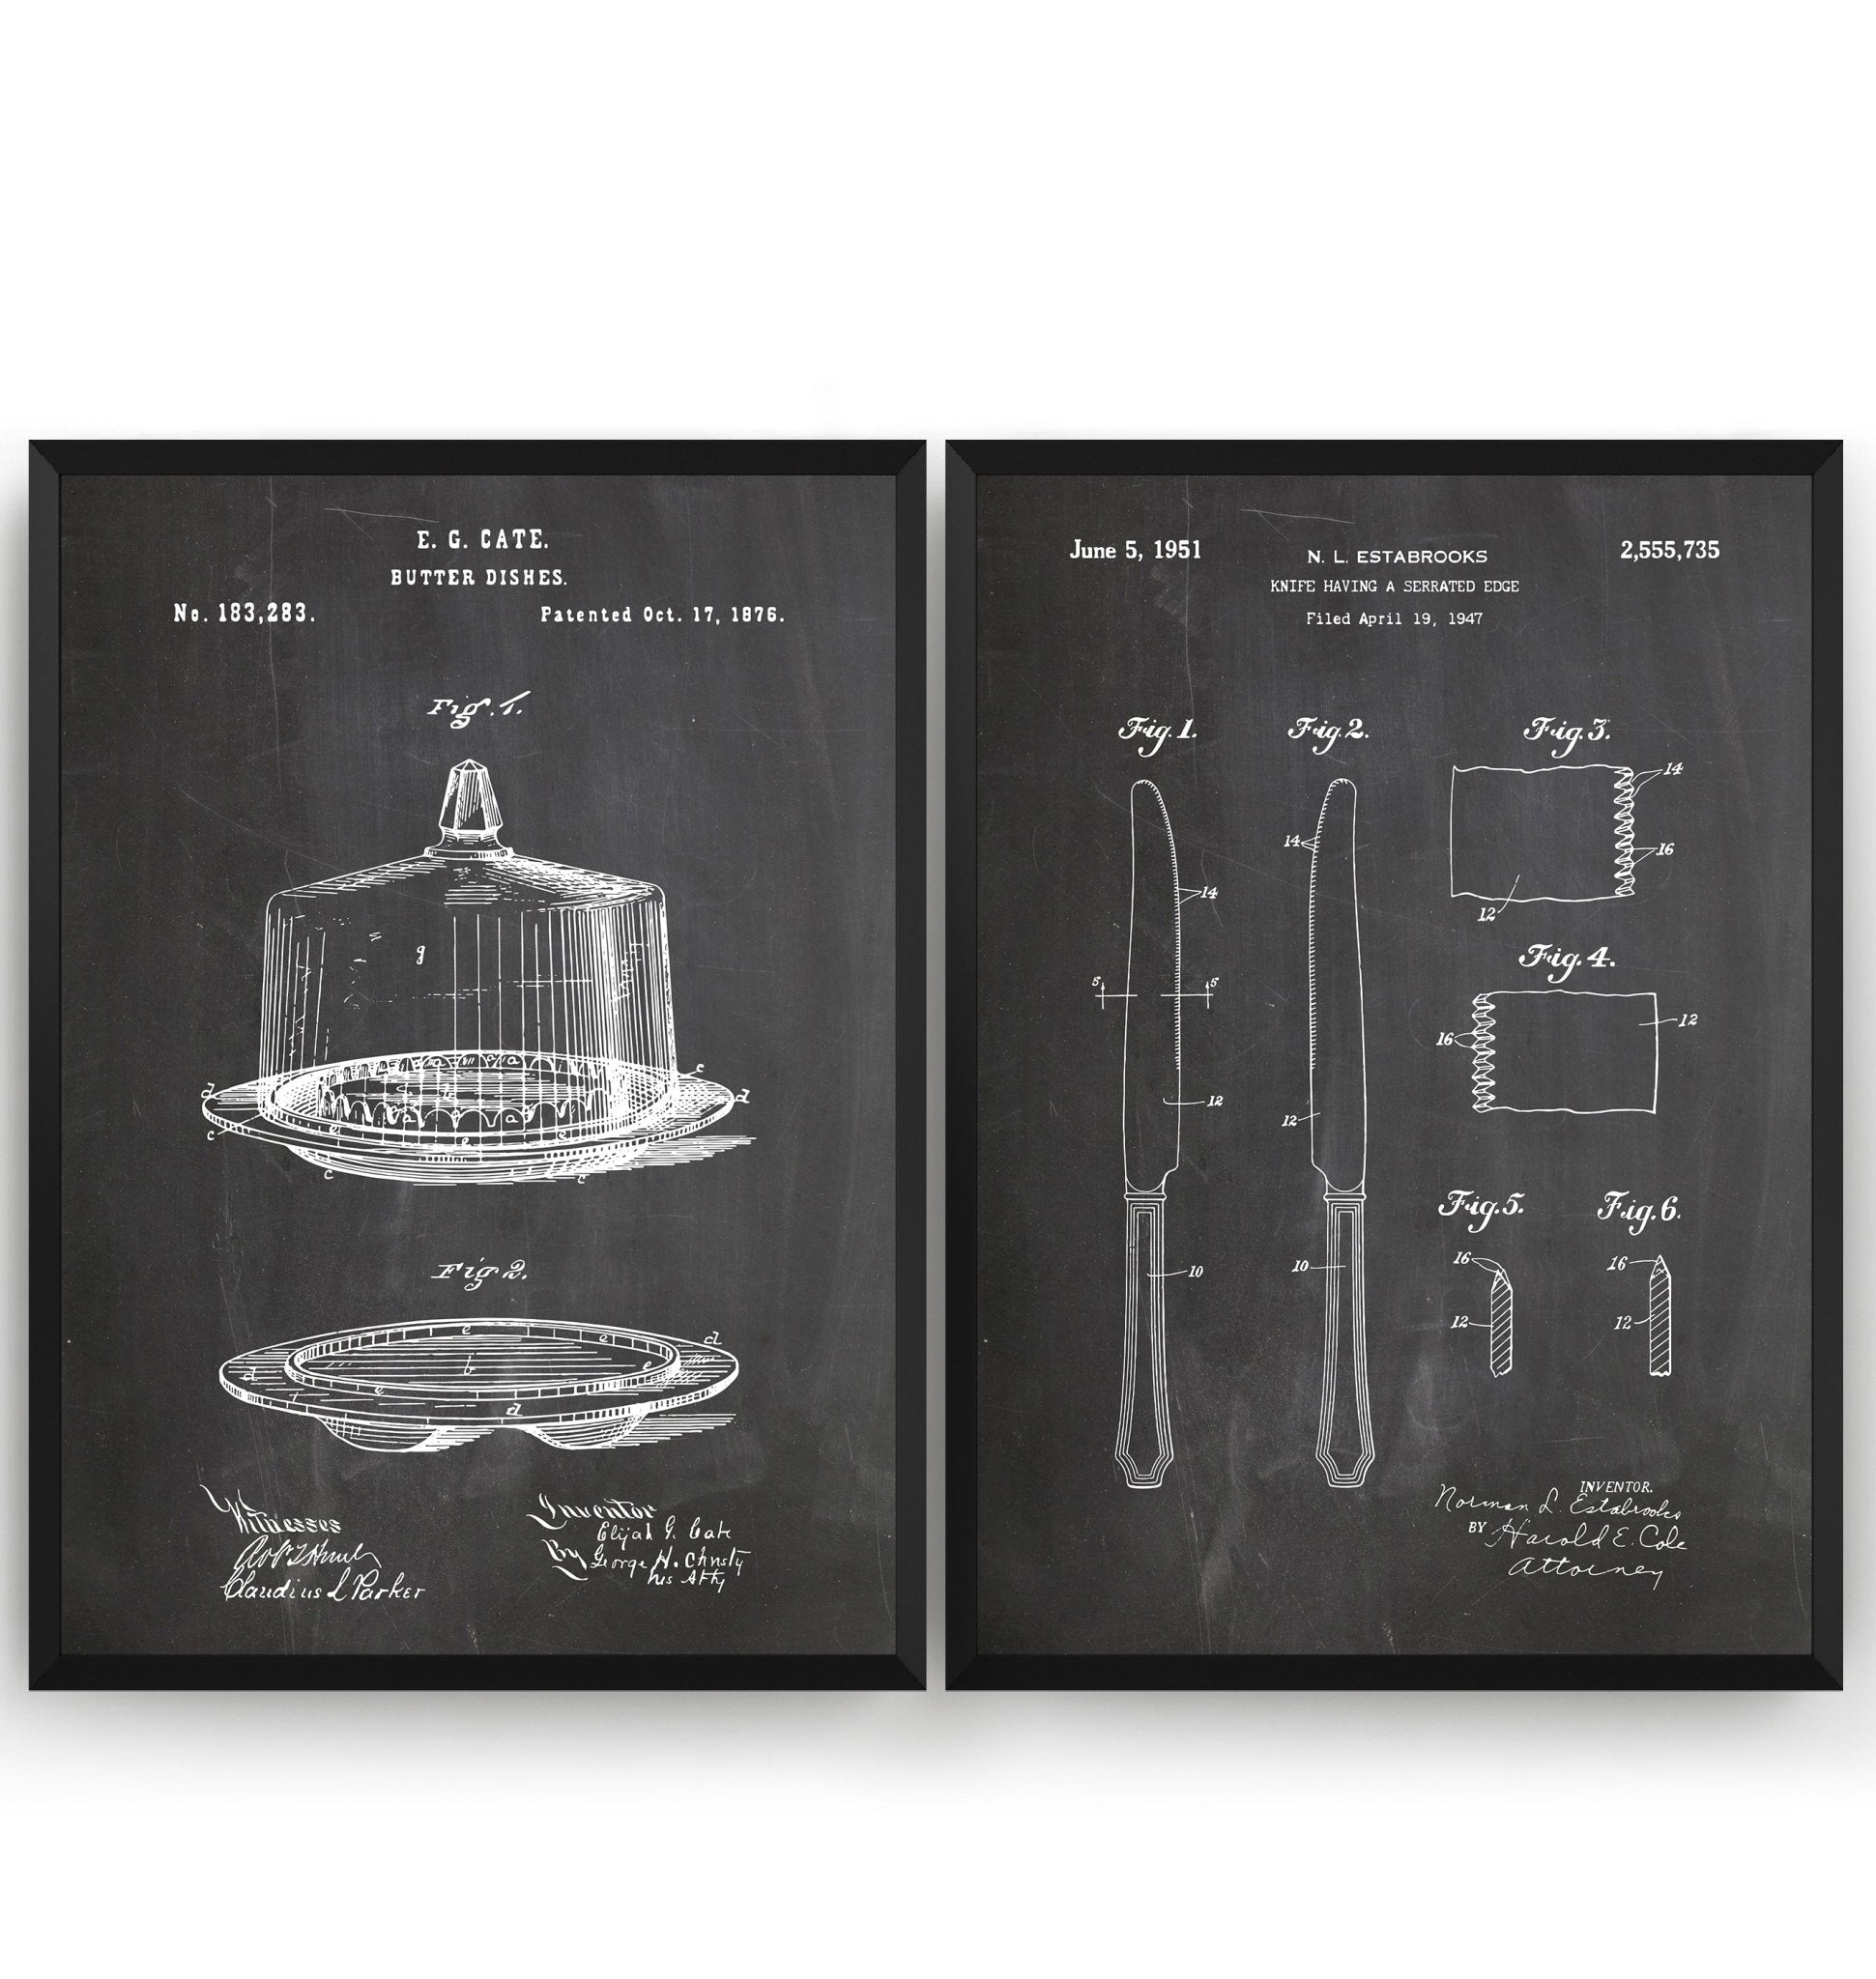 Butter Dish & Knife Set Of 2 Patent Prints - Magic Posters